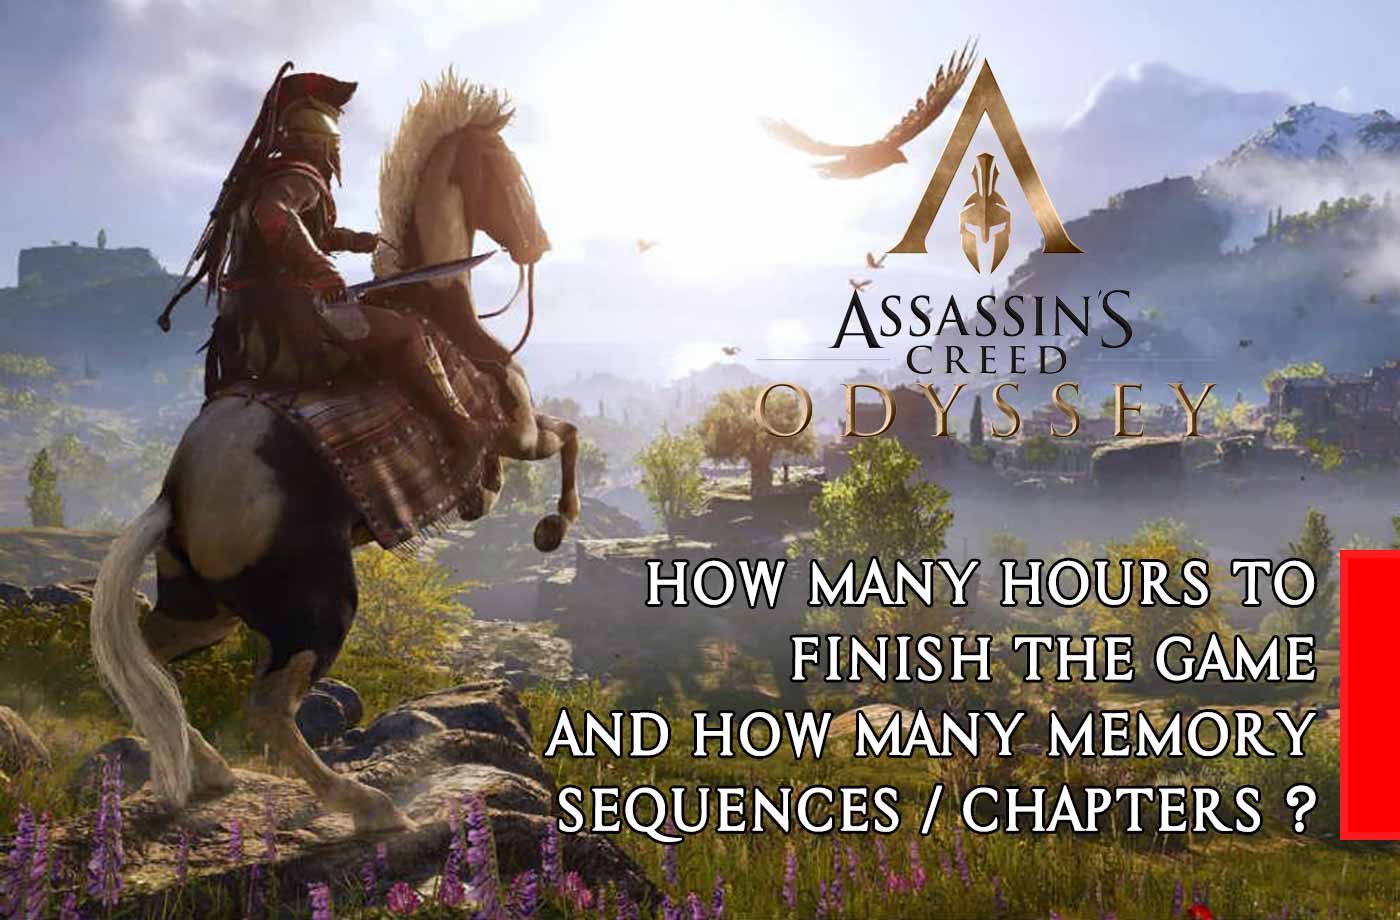 Wiki Assassin S Creed Odyssey How Many Hours To Finish The Game And How Many Memory Sequences Chapters Kill The Game